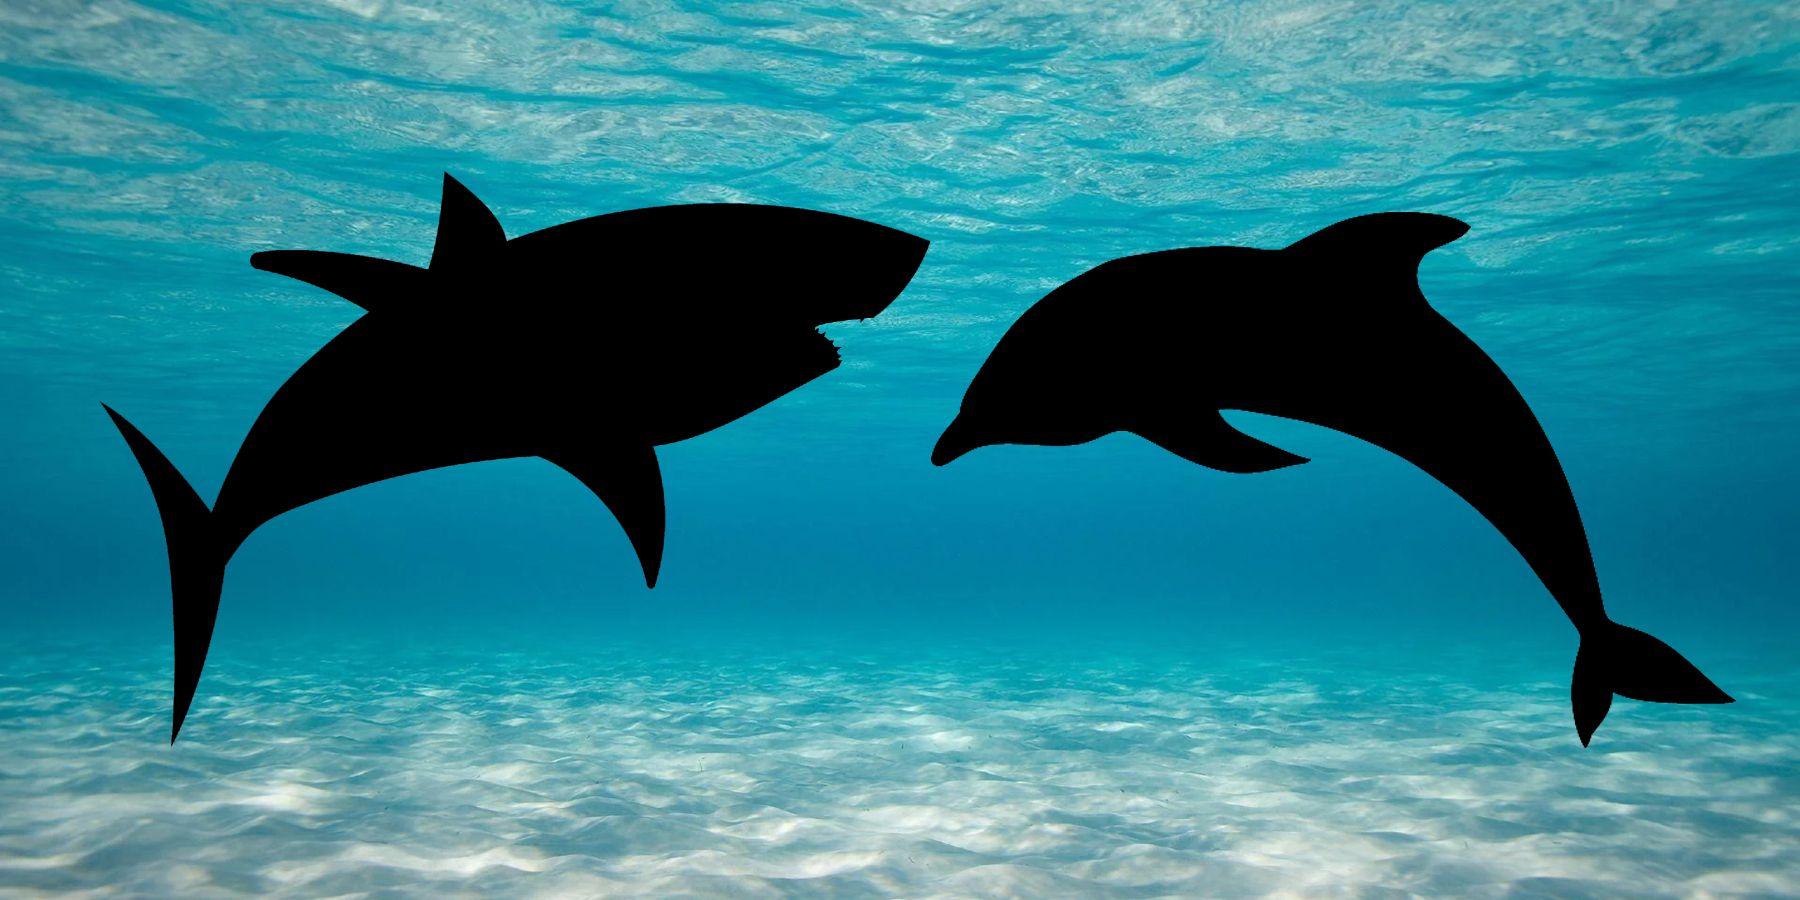 A silhouette of a shark and dolphin on a sea background.